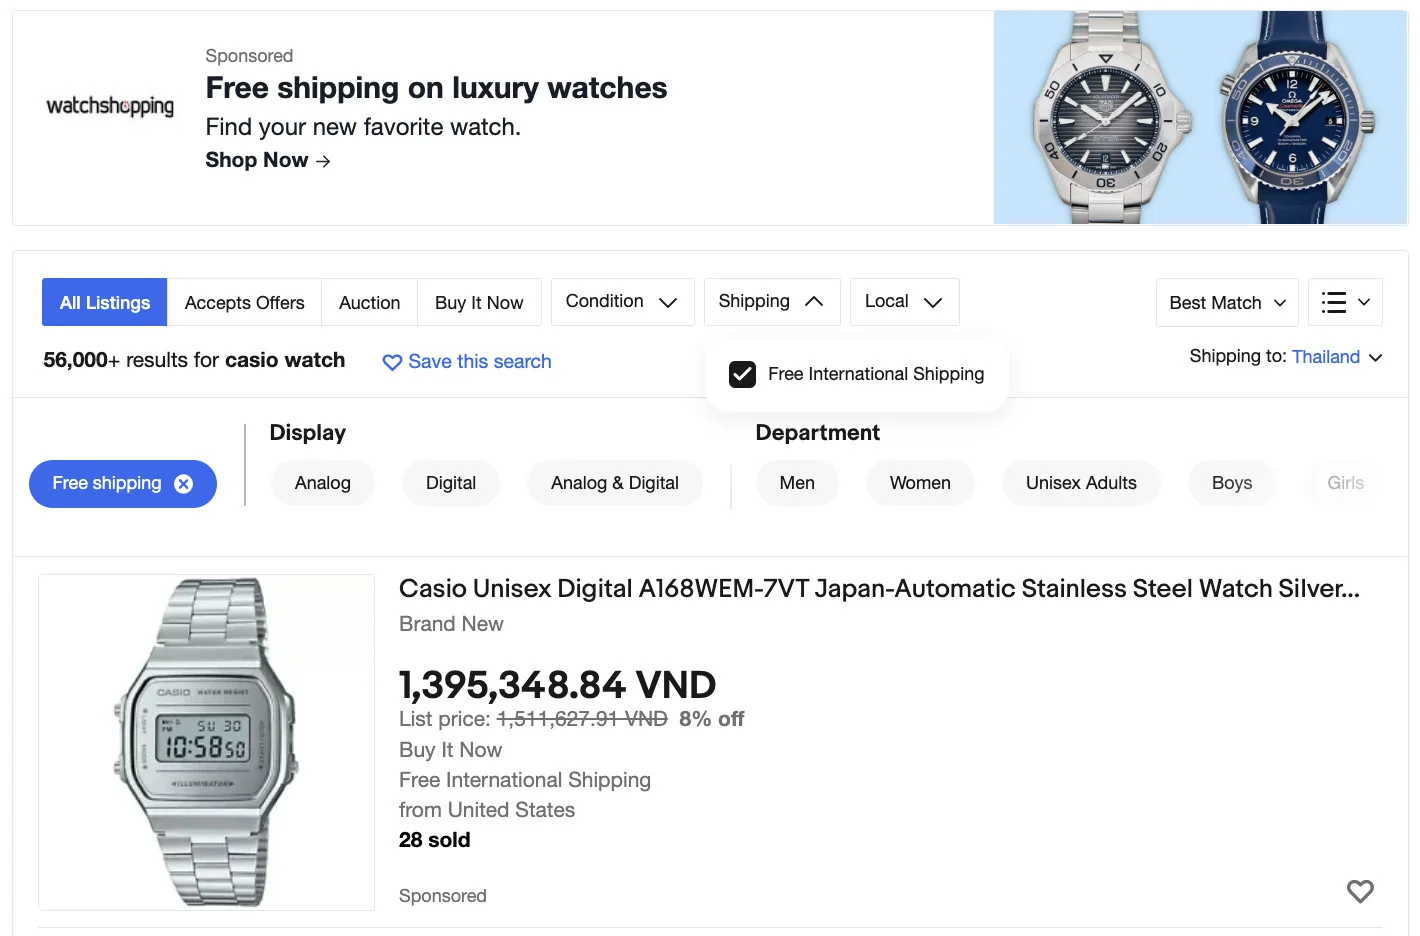 eBay free-shipping search filter can improves eBay search engine optimization